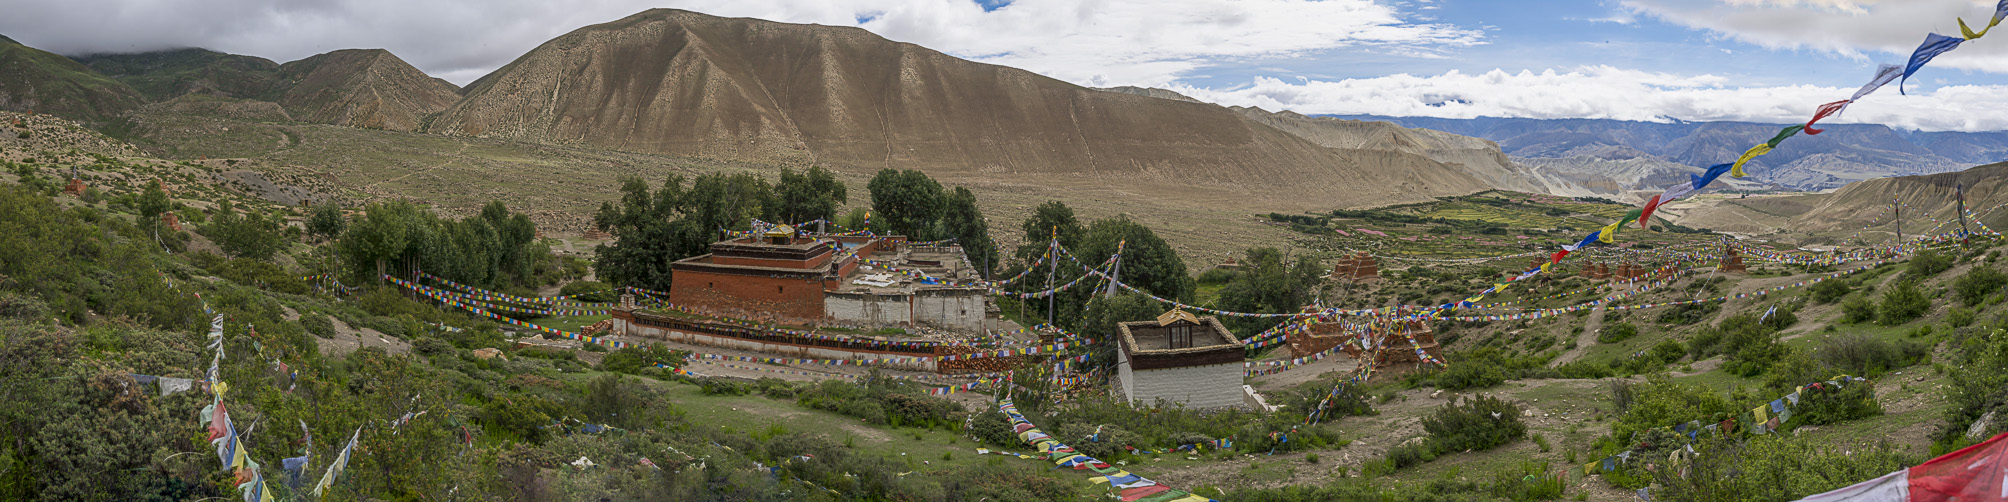 Panoramic view of red and white monastery complex situated in green valley before arid mountains